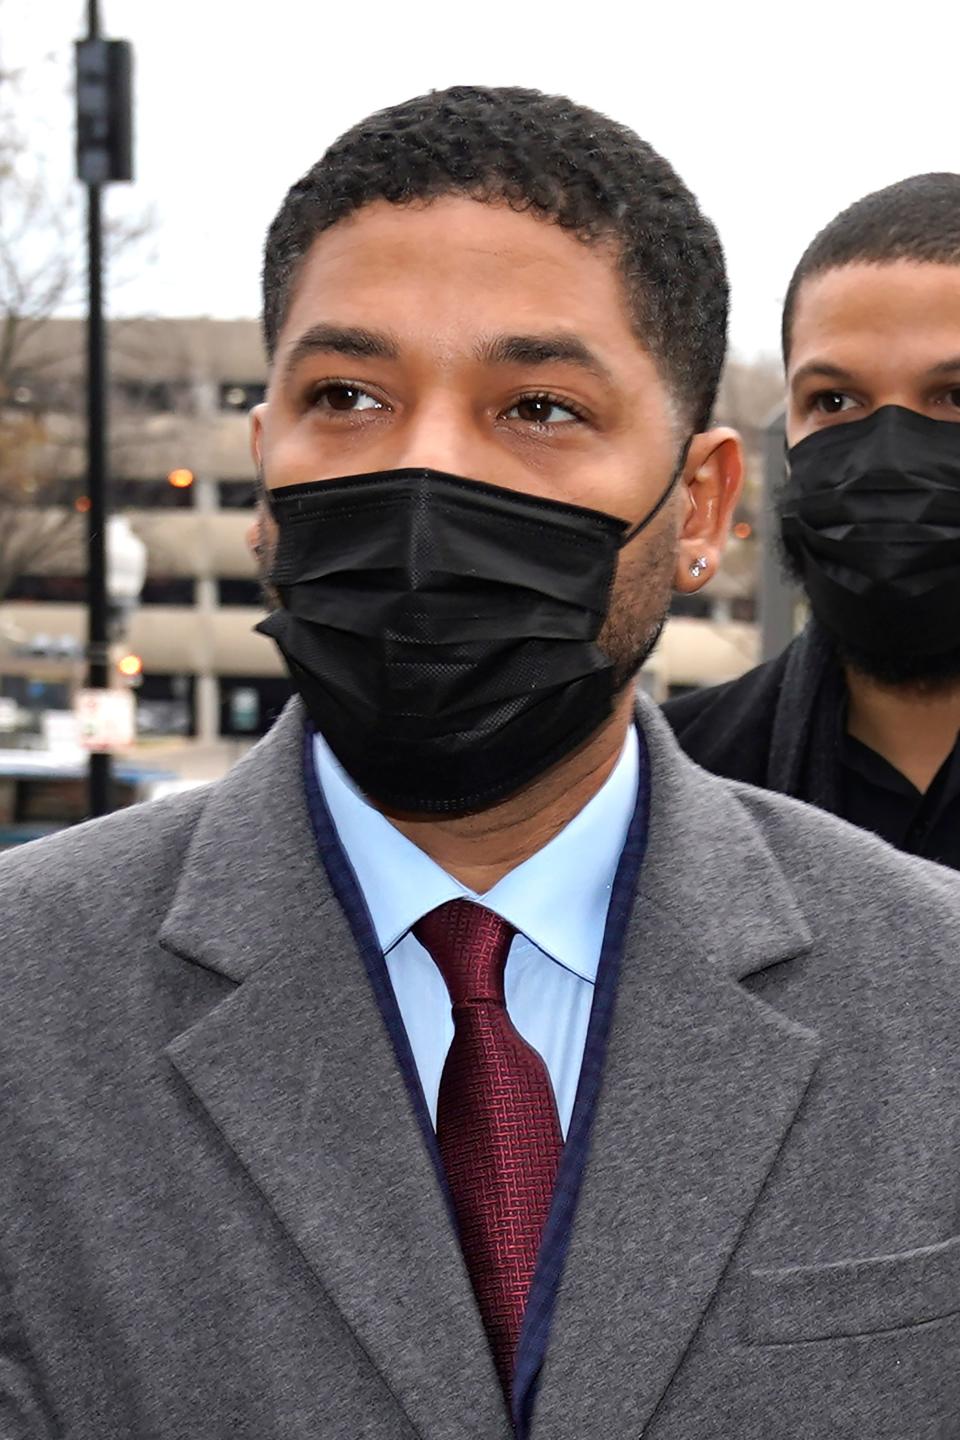 Actor Jussie Smollett arrives at the Leighton Criminal Courthouse for day three of his trial in Chicago on Wednesday, Dec. 1, 2021.